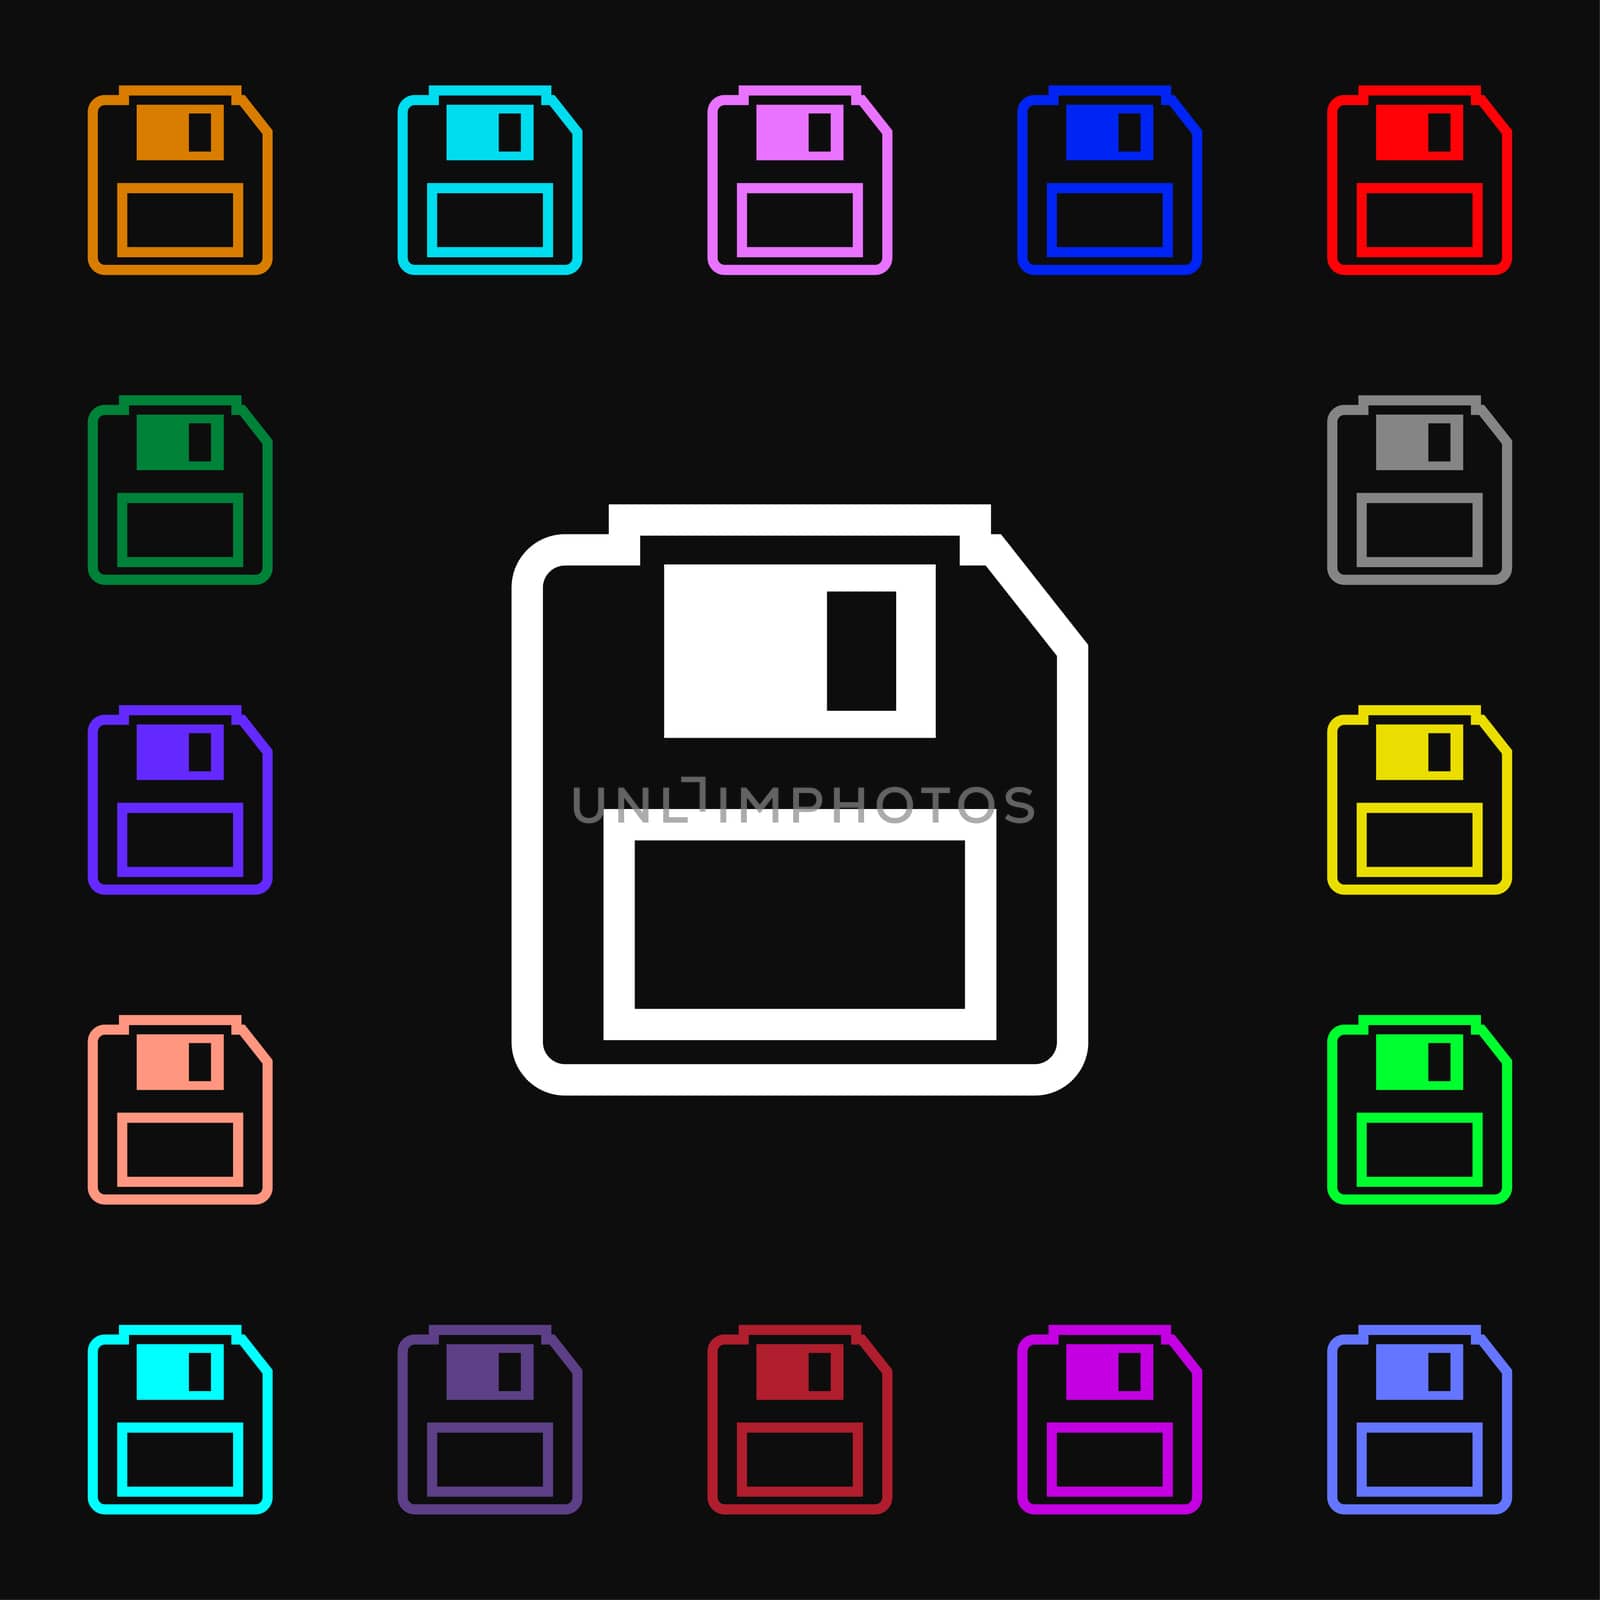 floppy disk icon sign. Lots of colorful symbols for your design. illustration